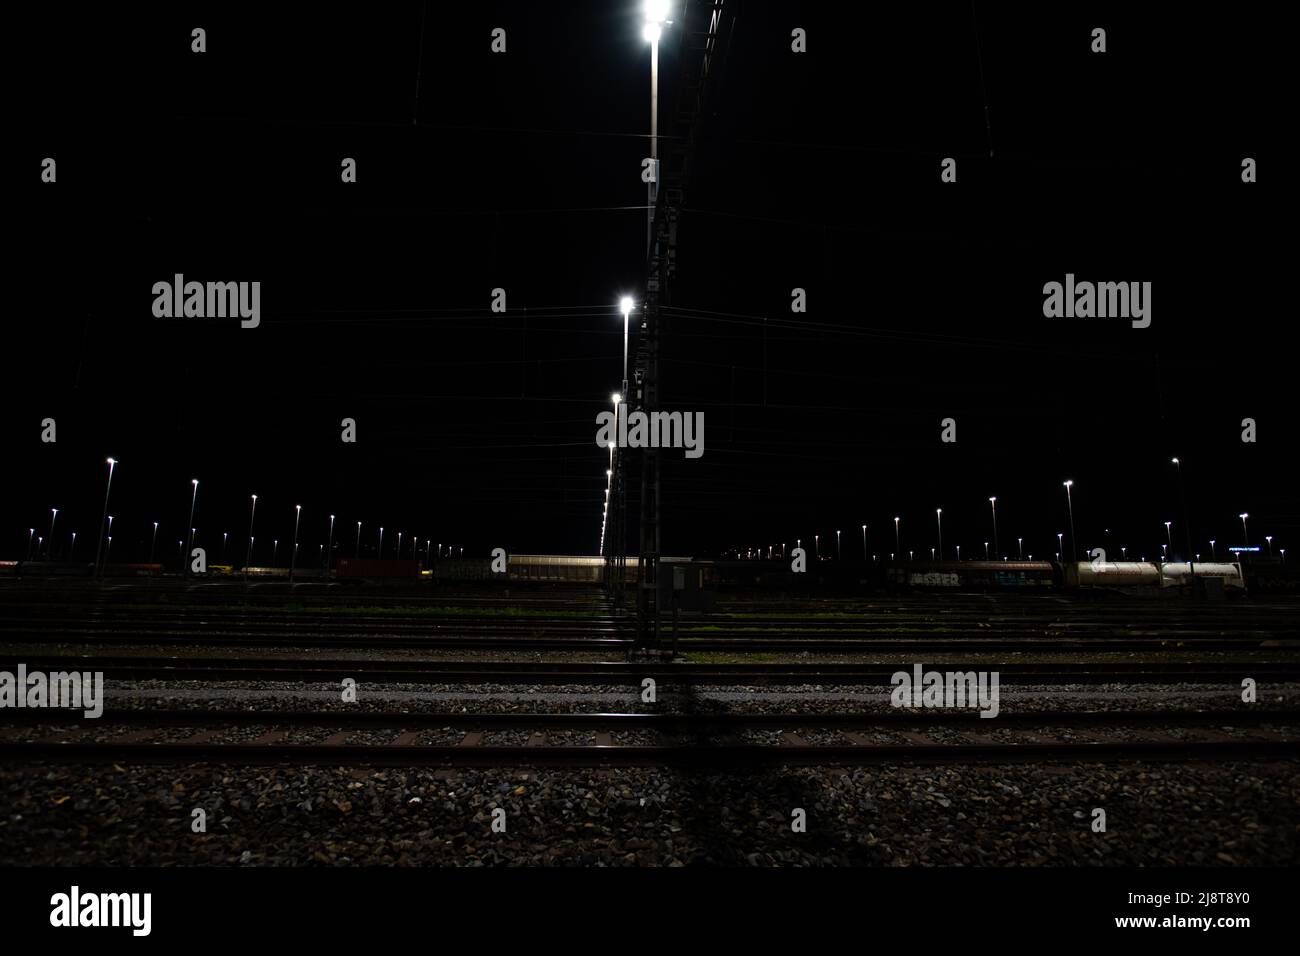 Freight station at night in Zurich, Spreitenbach. Freight trains are illuminated by bright headlights. Image is dark in foreground. Stock Photo